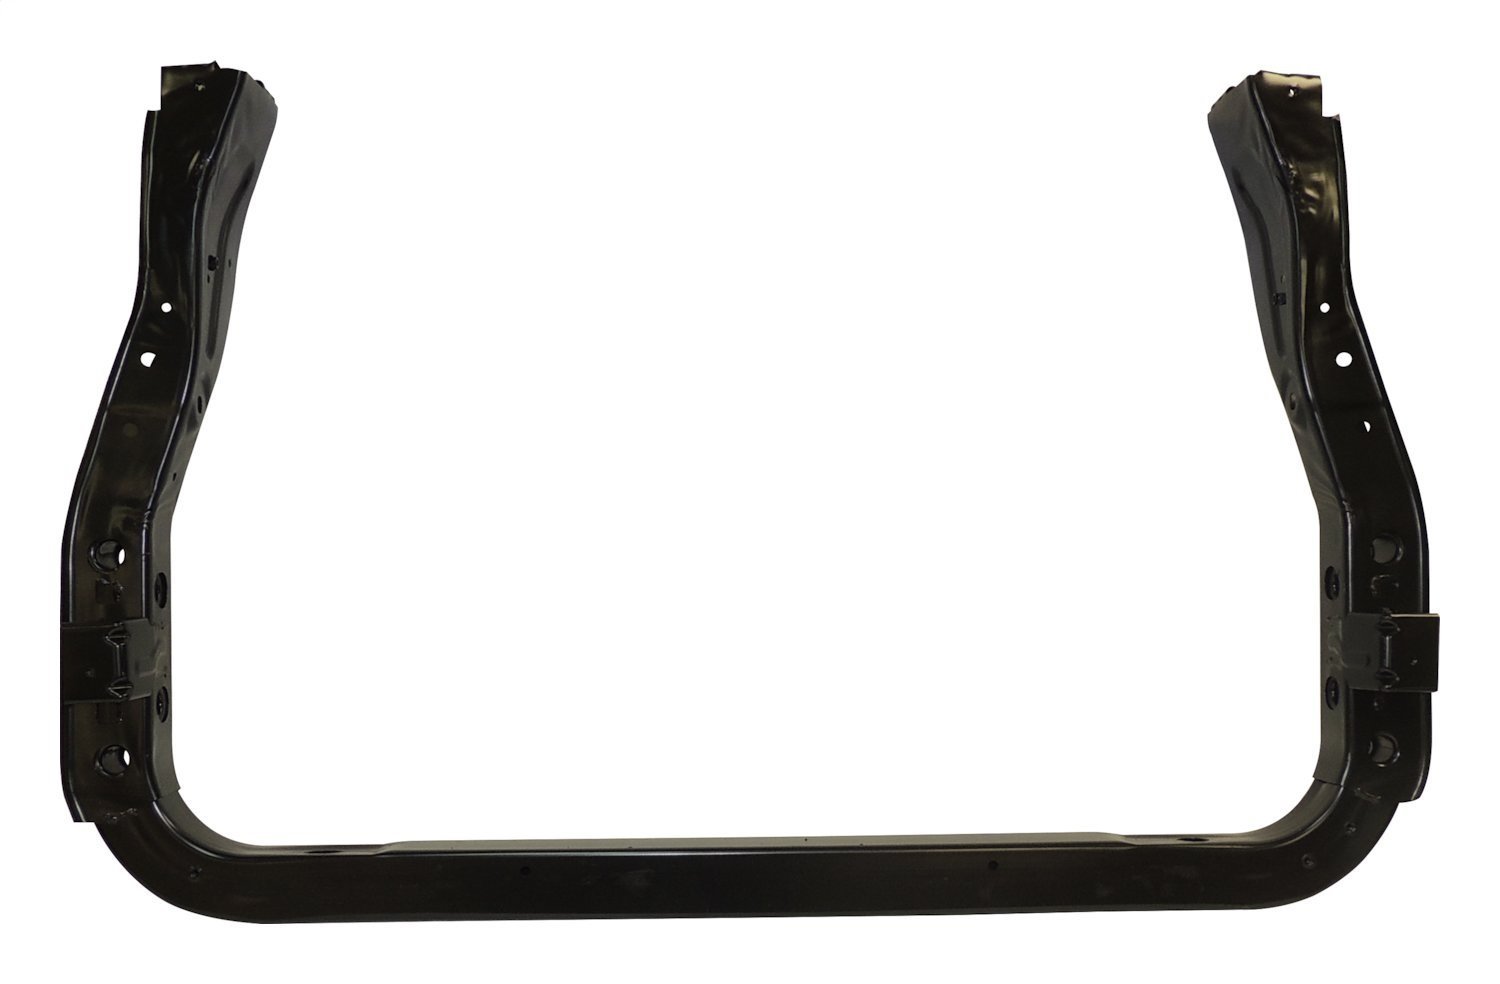 Radiator Support Frame for 2011-2021 Jeep WK Grand Cherokee and 2011-2021 Dodge Durango